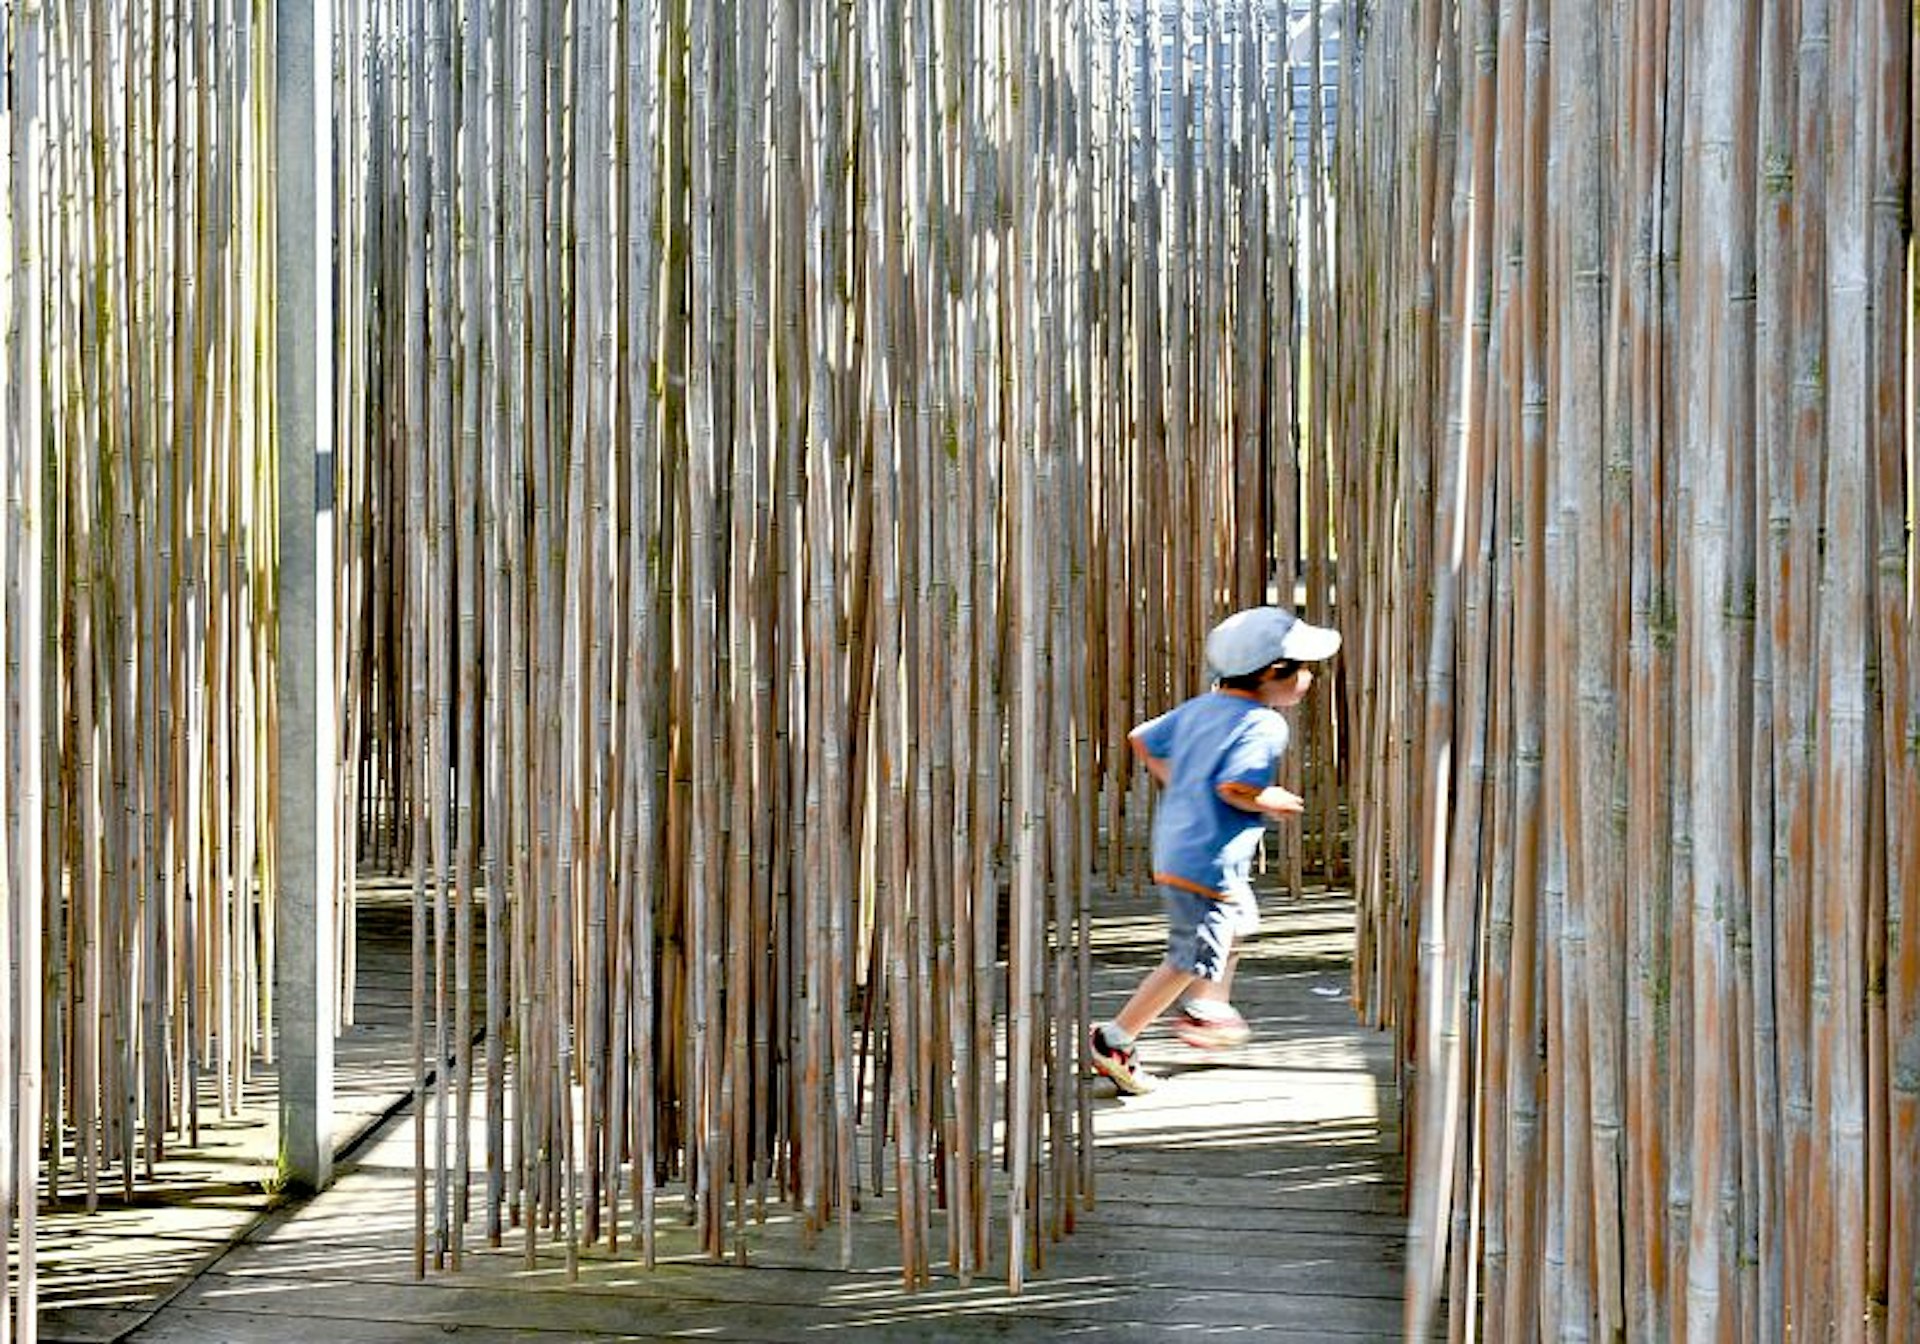 A small child running through a bamboo labyrinth at Diverti'Parc in France